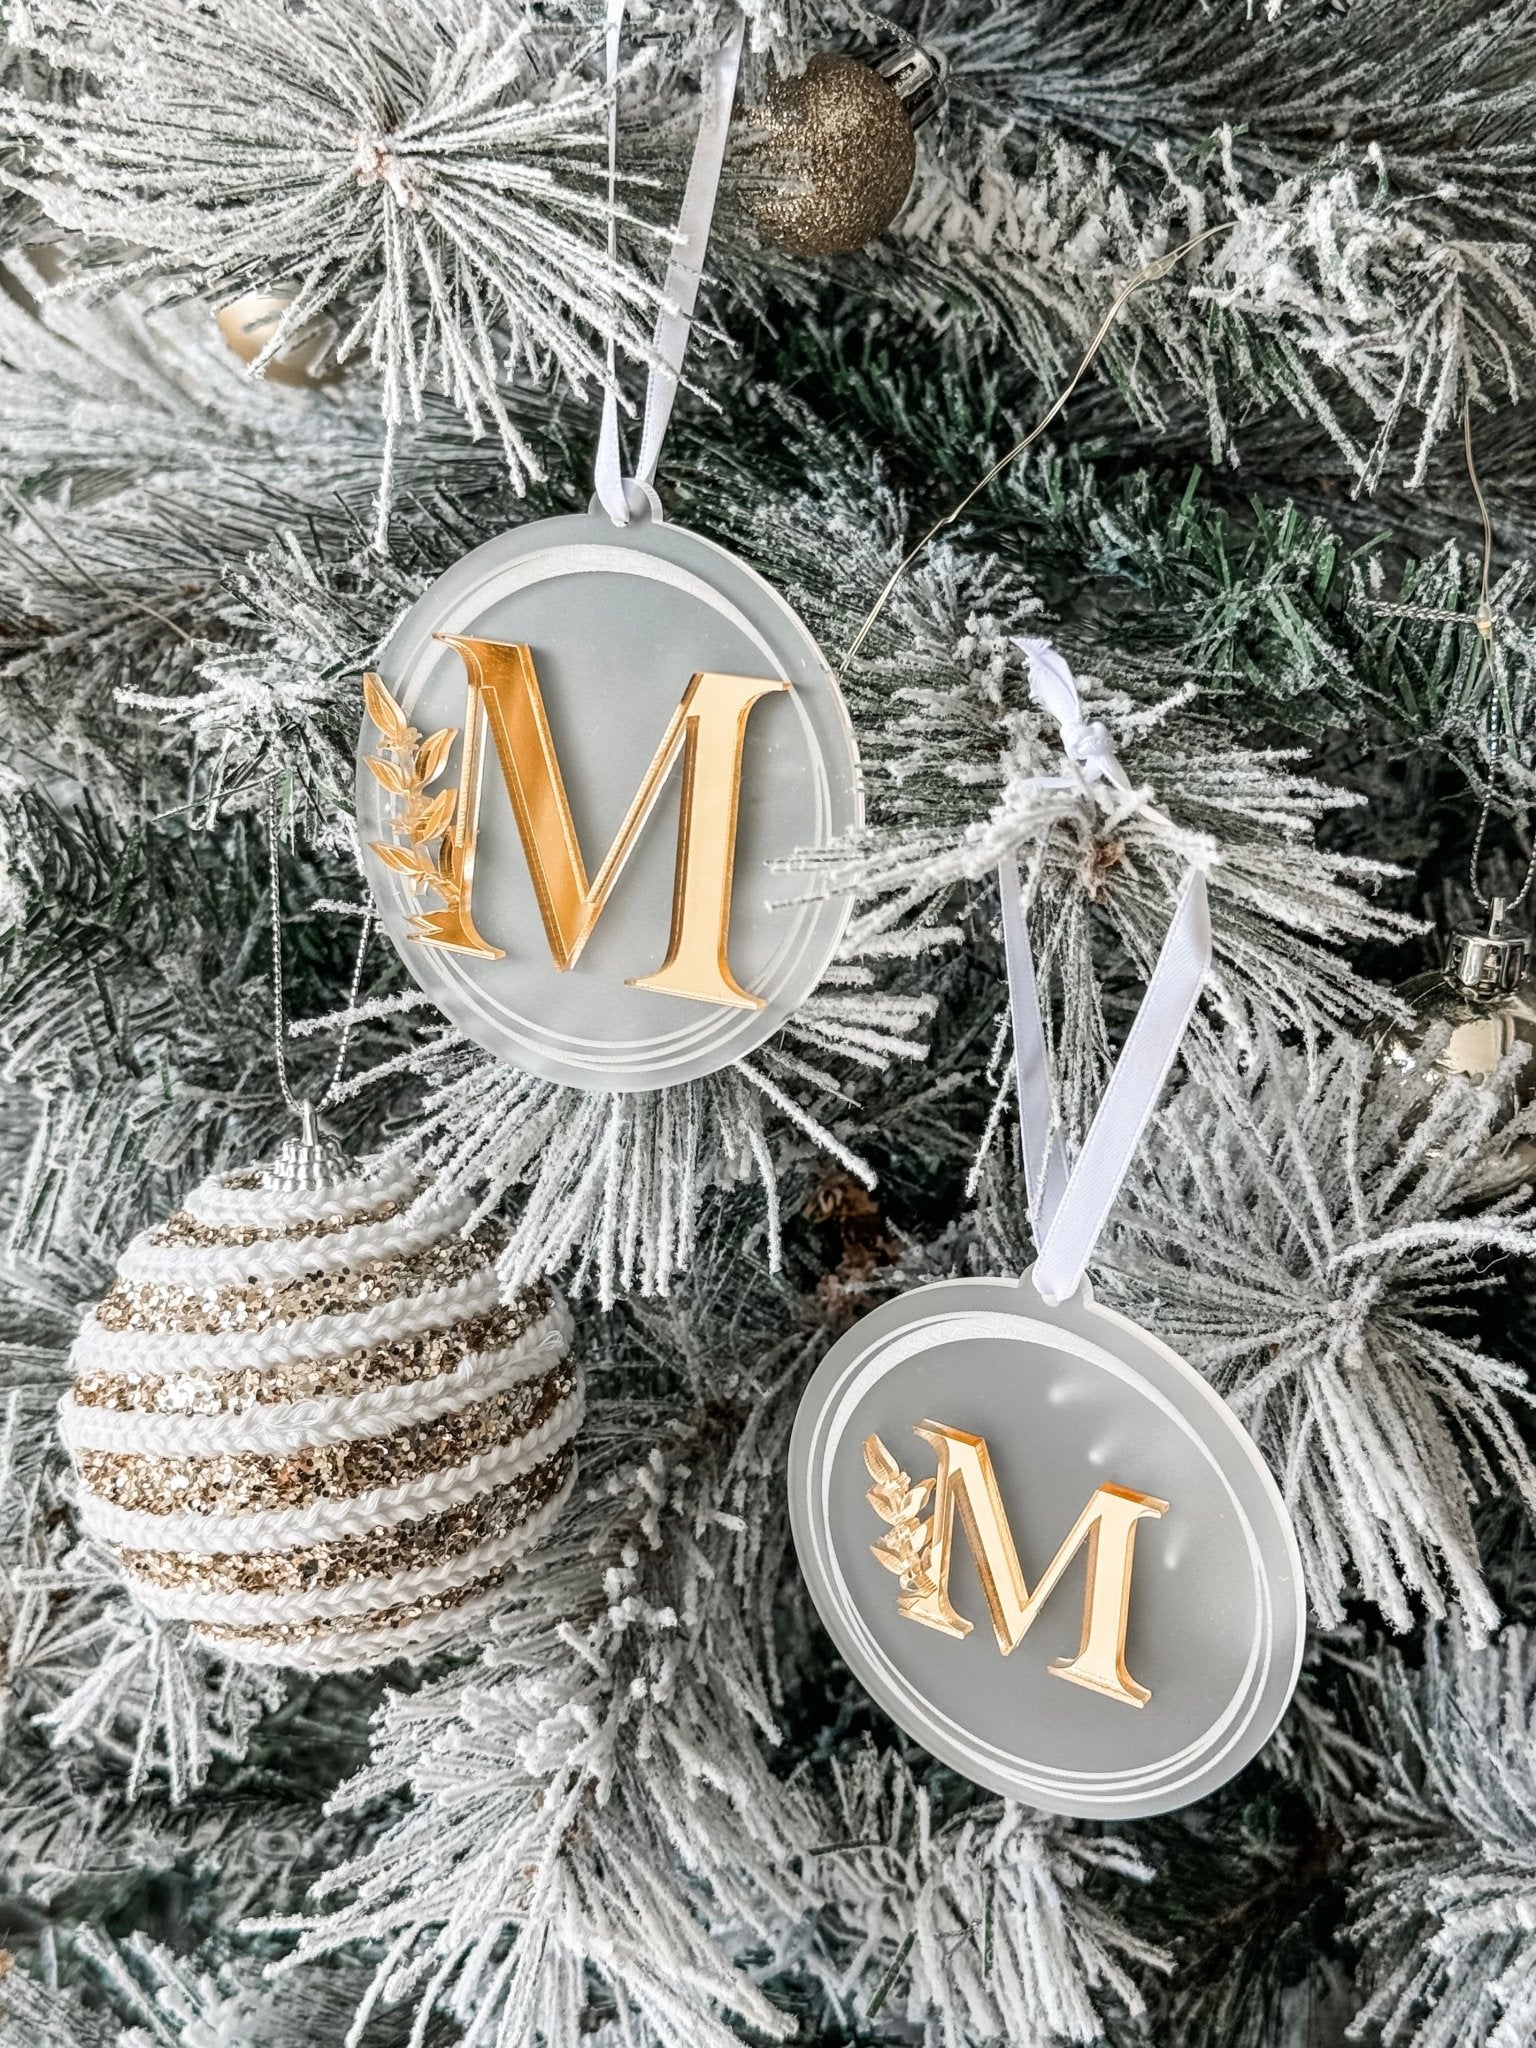 Double Layered Acrylic Monogram Ornament - The Humble Gift Co.